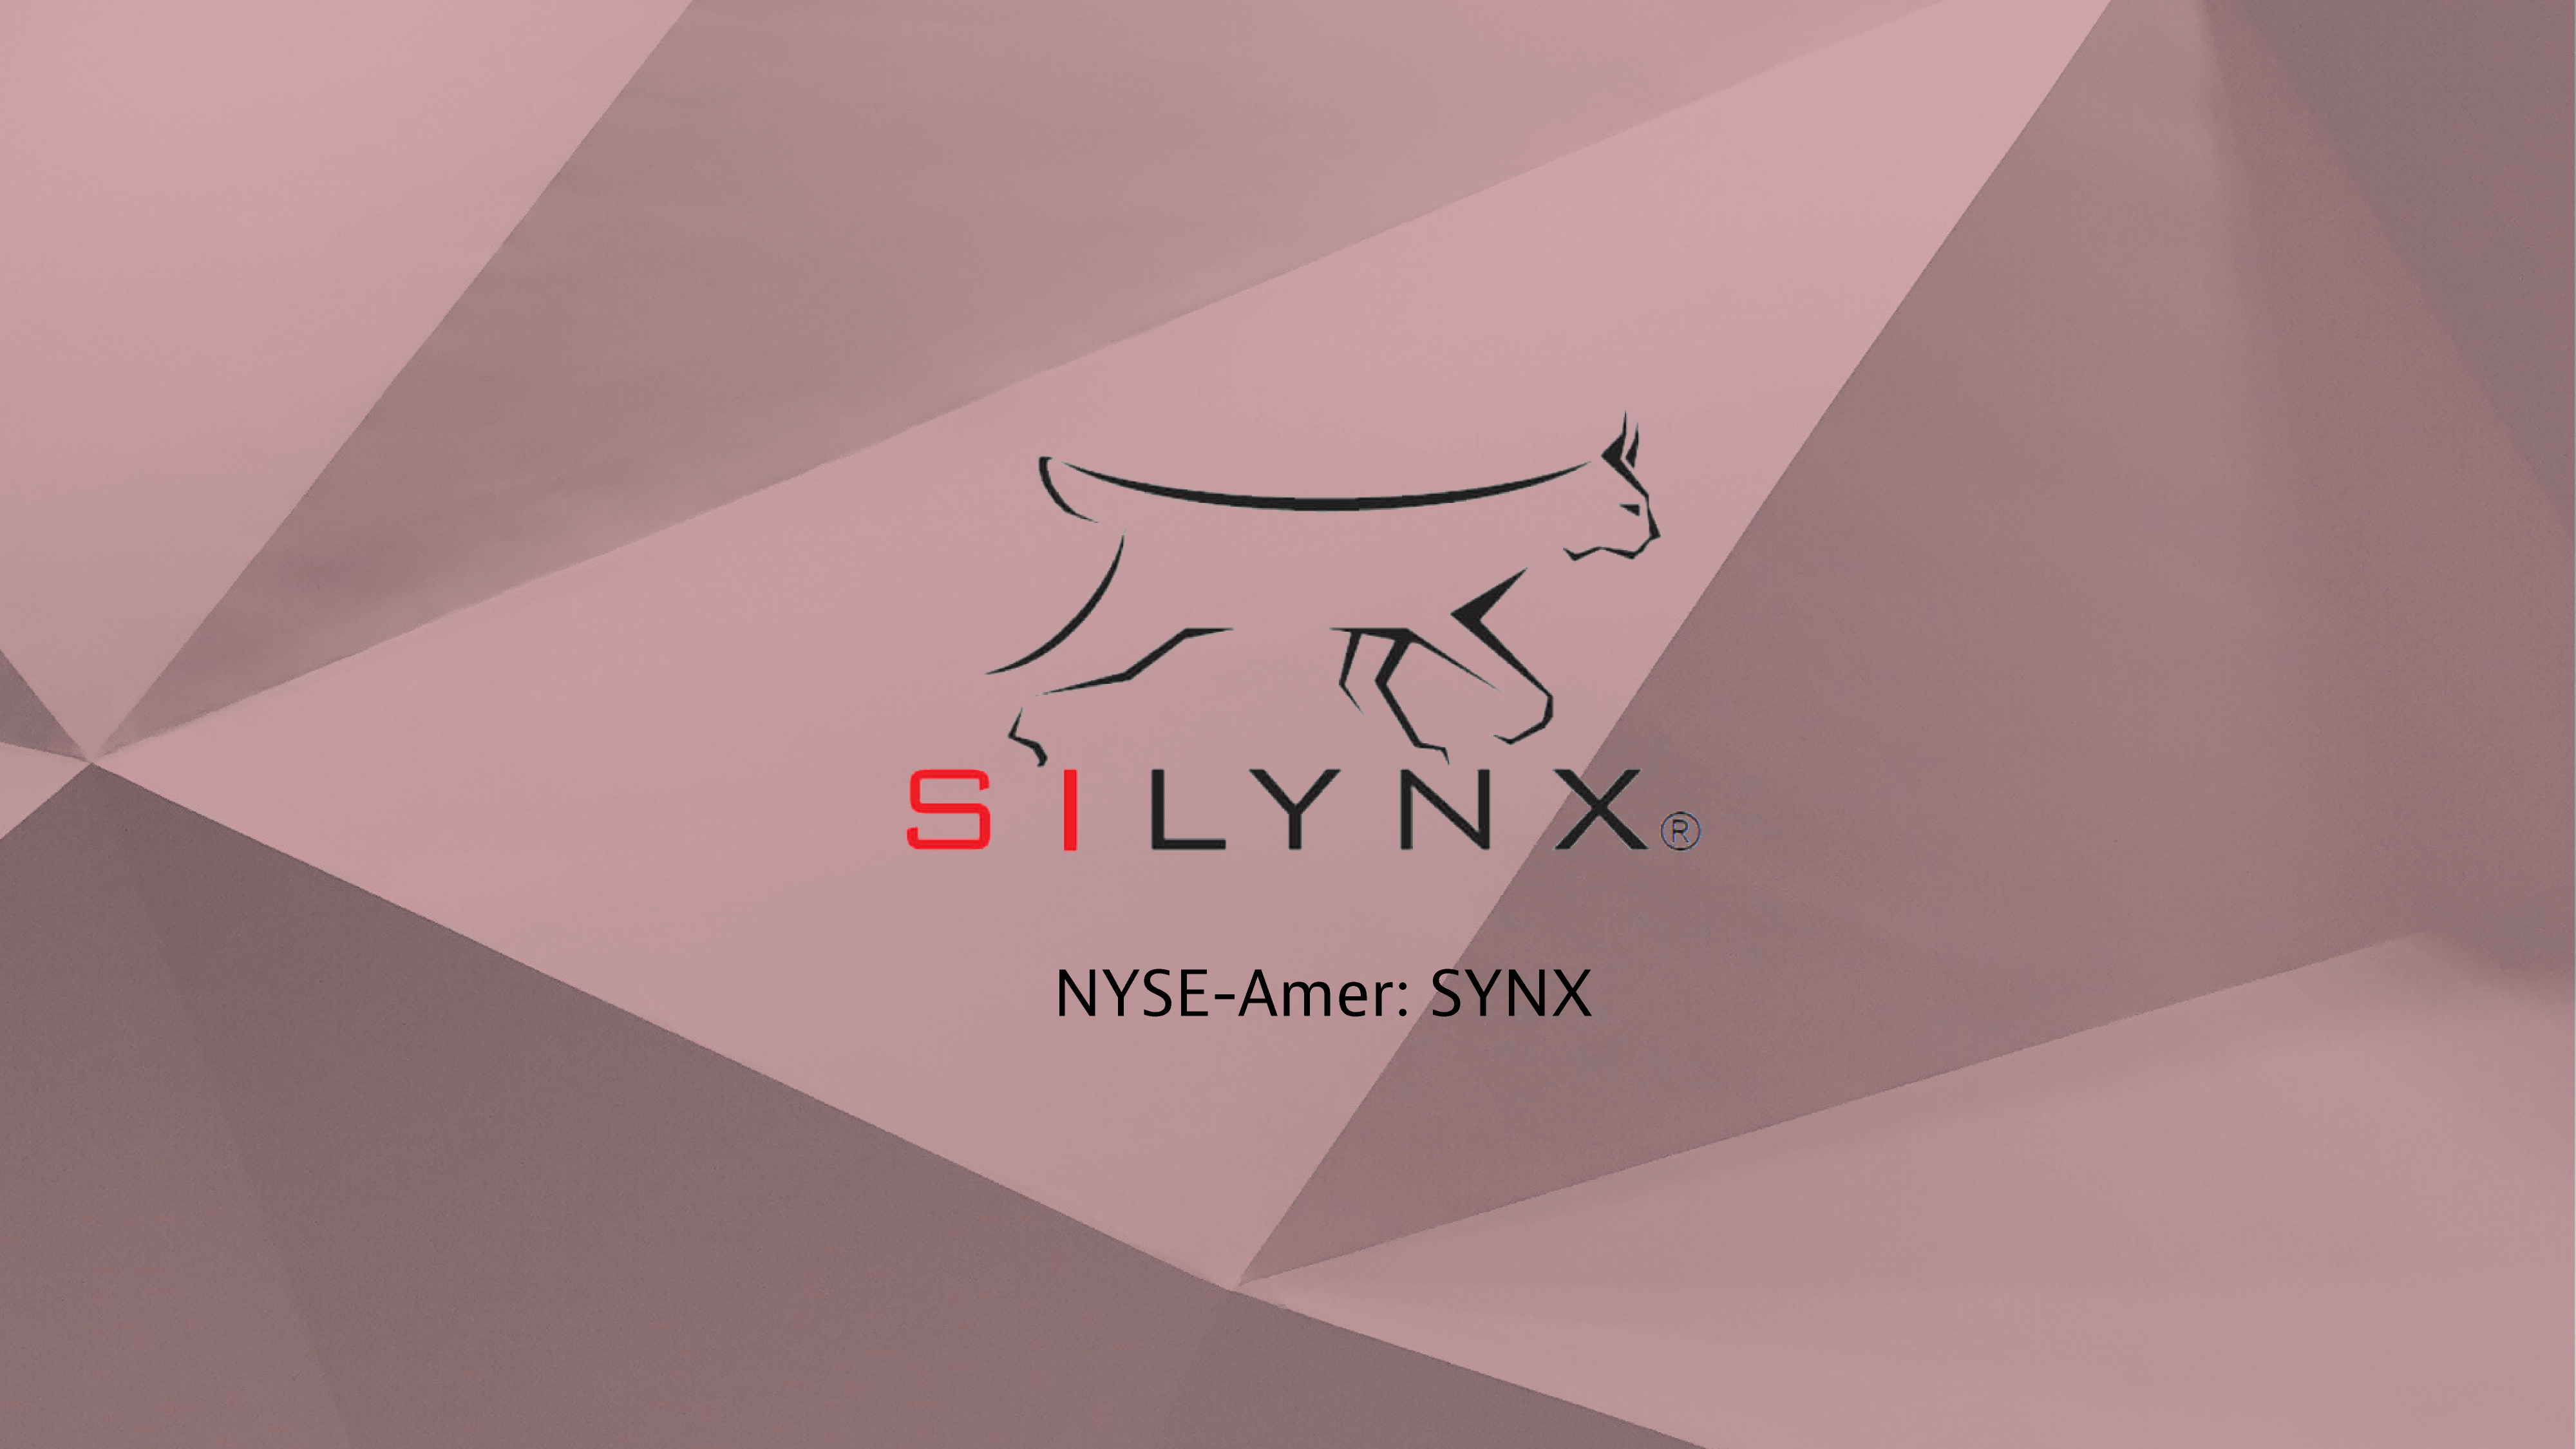 Silynxcom Revenues Surge As Demand Curve For Company’s Ruggedized, Field-Tested Communications Equipment Steepens ($SYNX)